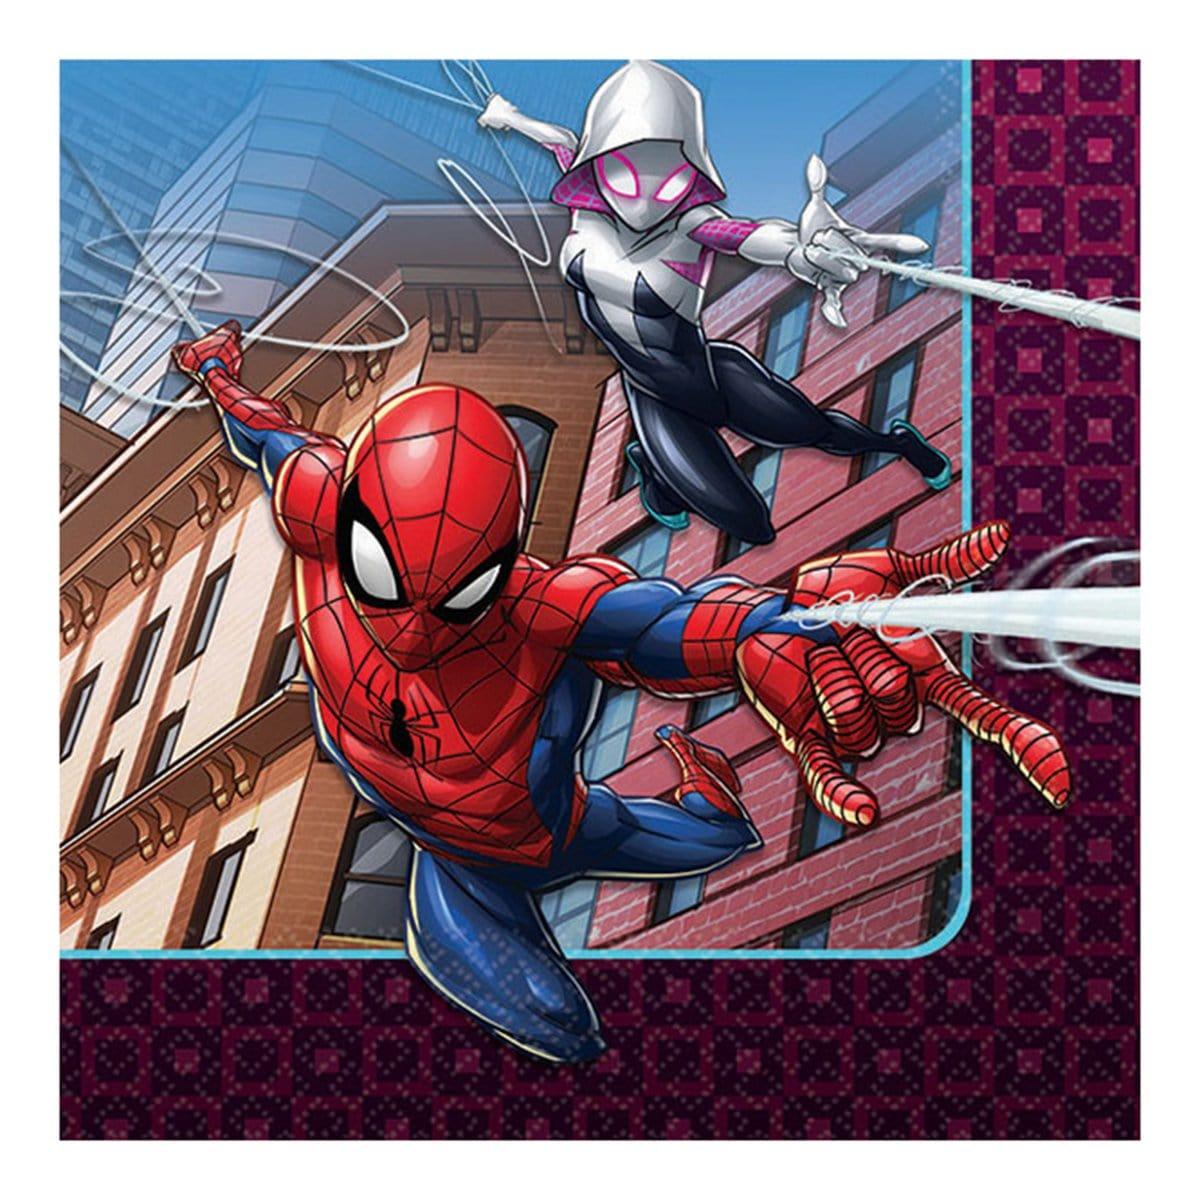 Buy Kids Birthday Spider-Man beverage napkins, 16 per package sold at Party Expert